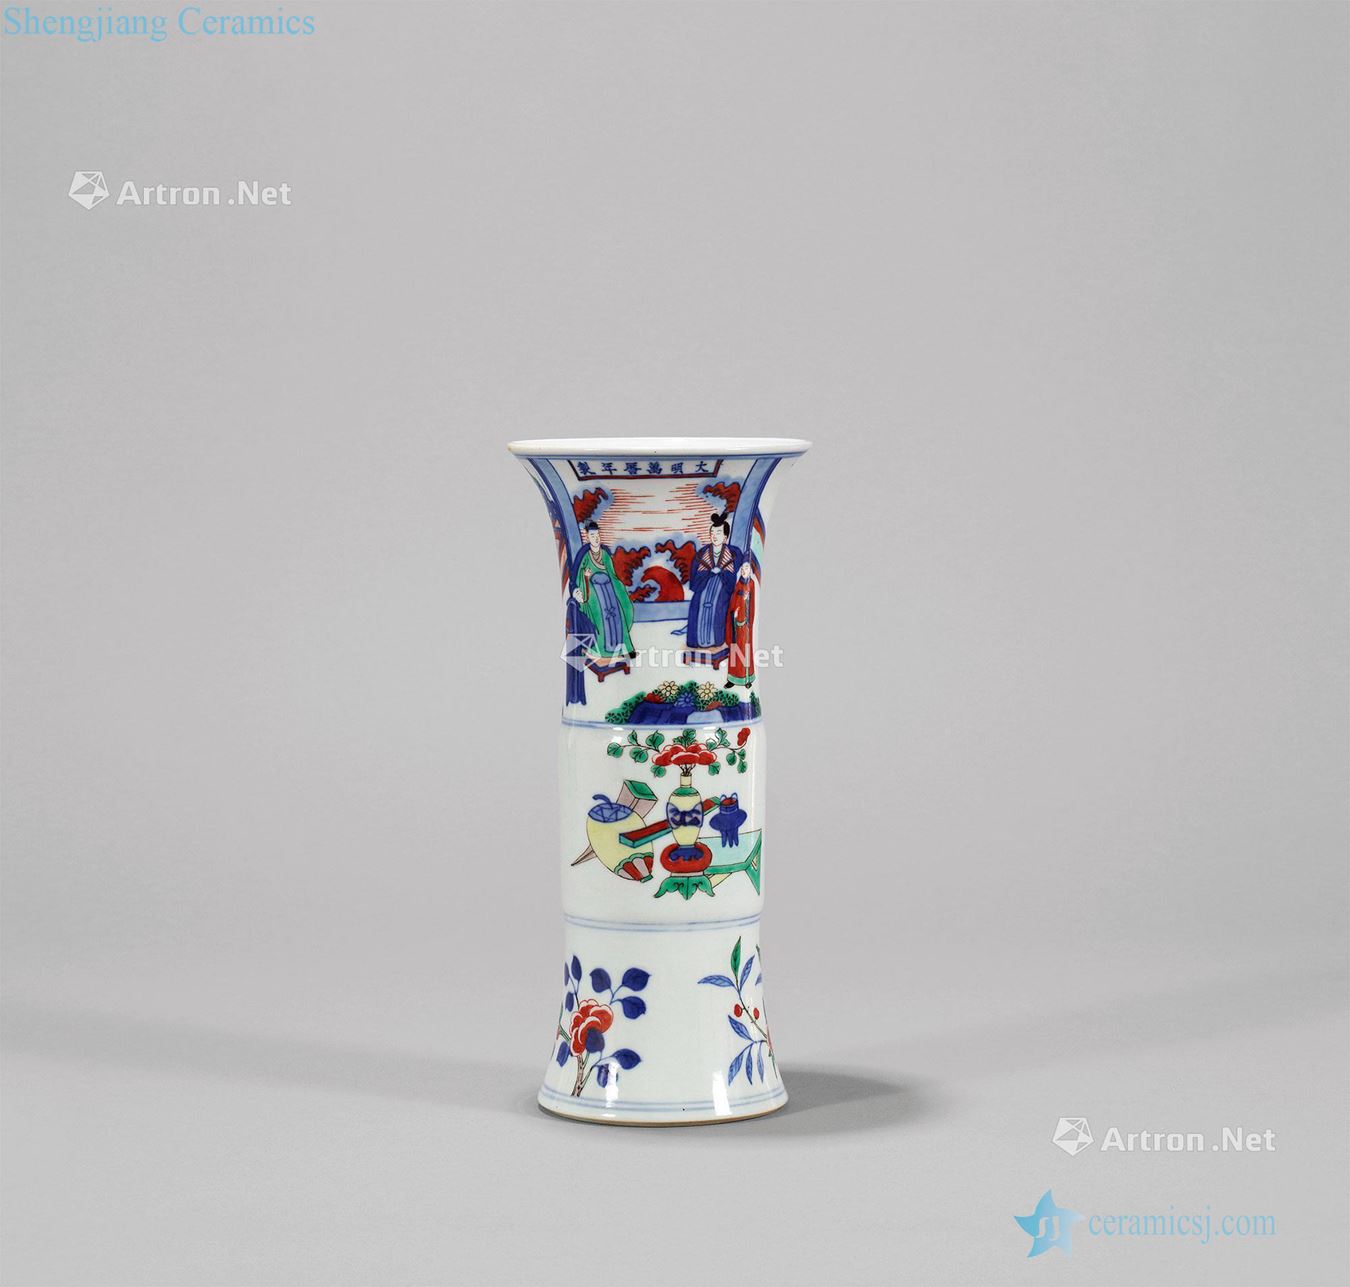 Clear story flower vase with colorful characters